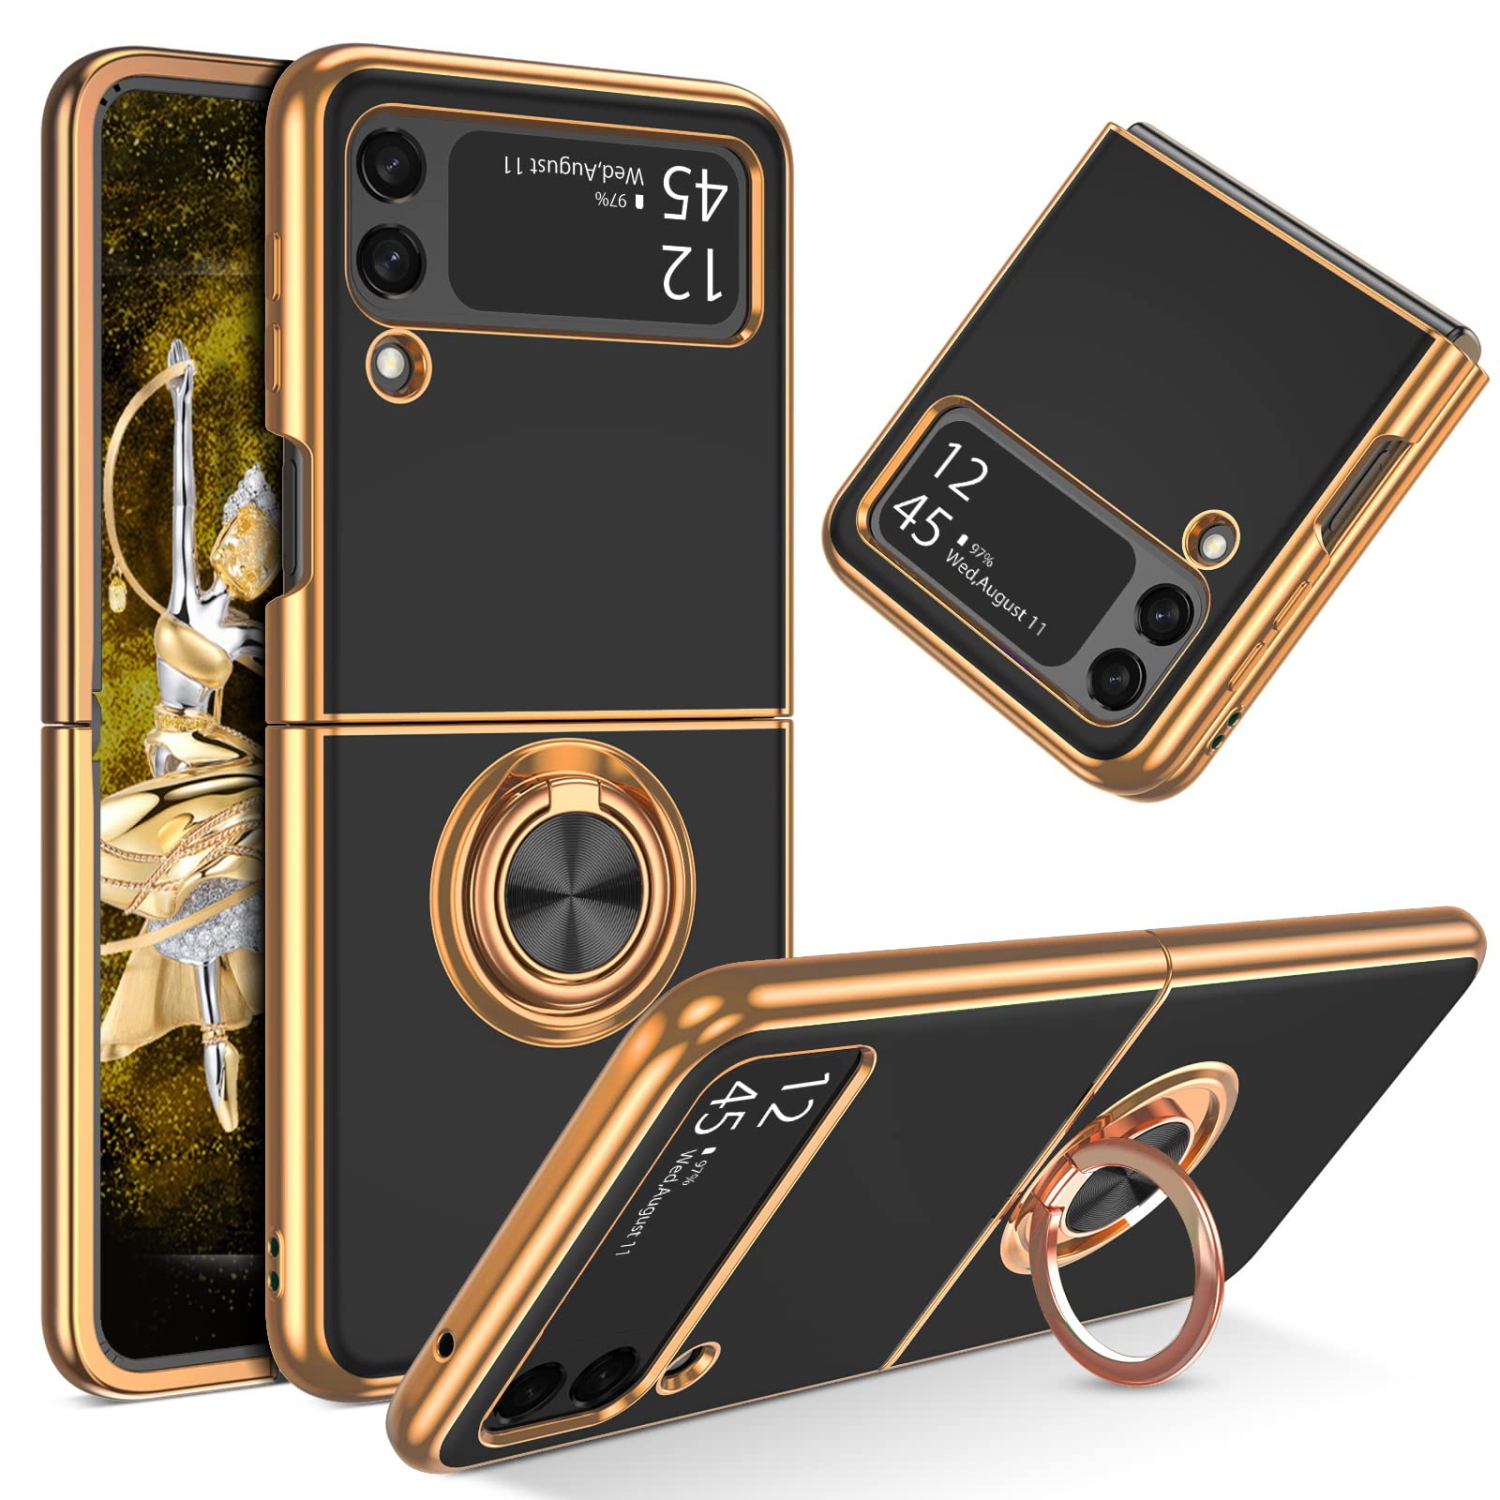 GUAGUA Case for Samsung Galaxy Z Flip 3 5G Flexible Soft TPU Plating Cover with 360 Rotating Ring Holder Kickstand Shockproo